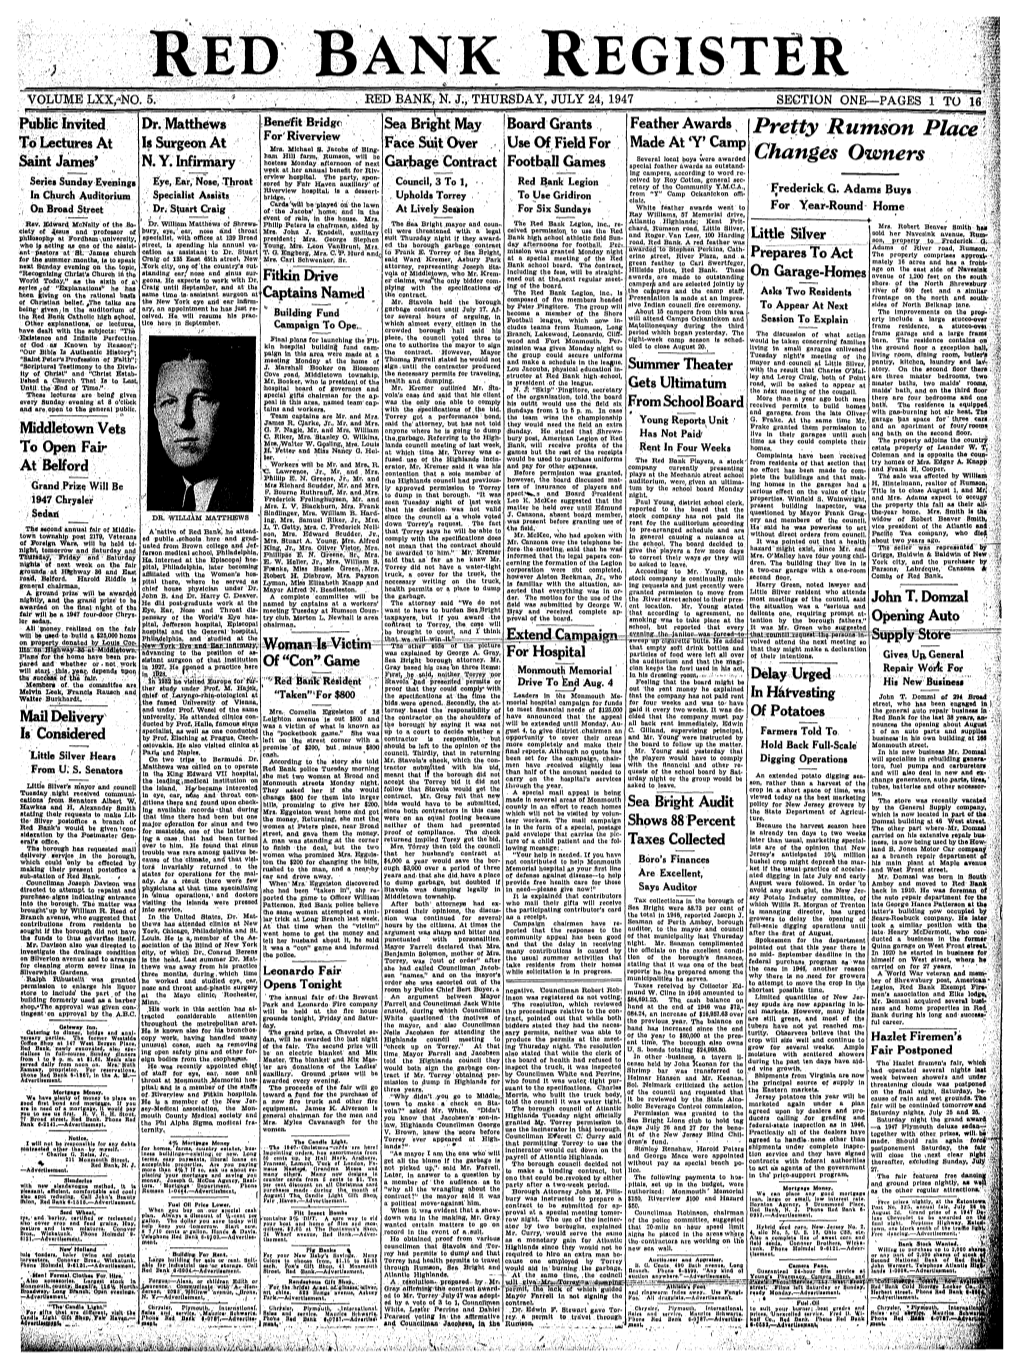 24, 1947 SECTION ONE—PAGES 1 to 16 Public Invited Dr